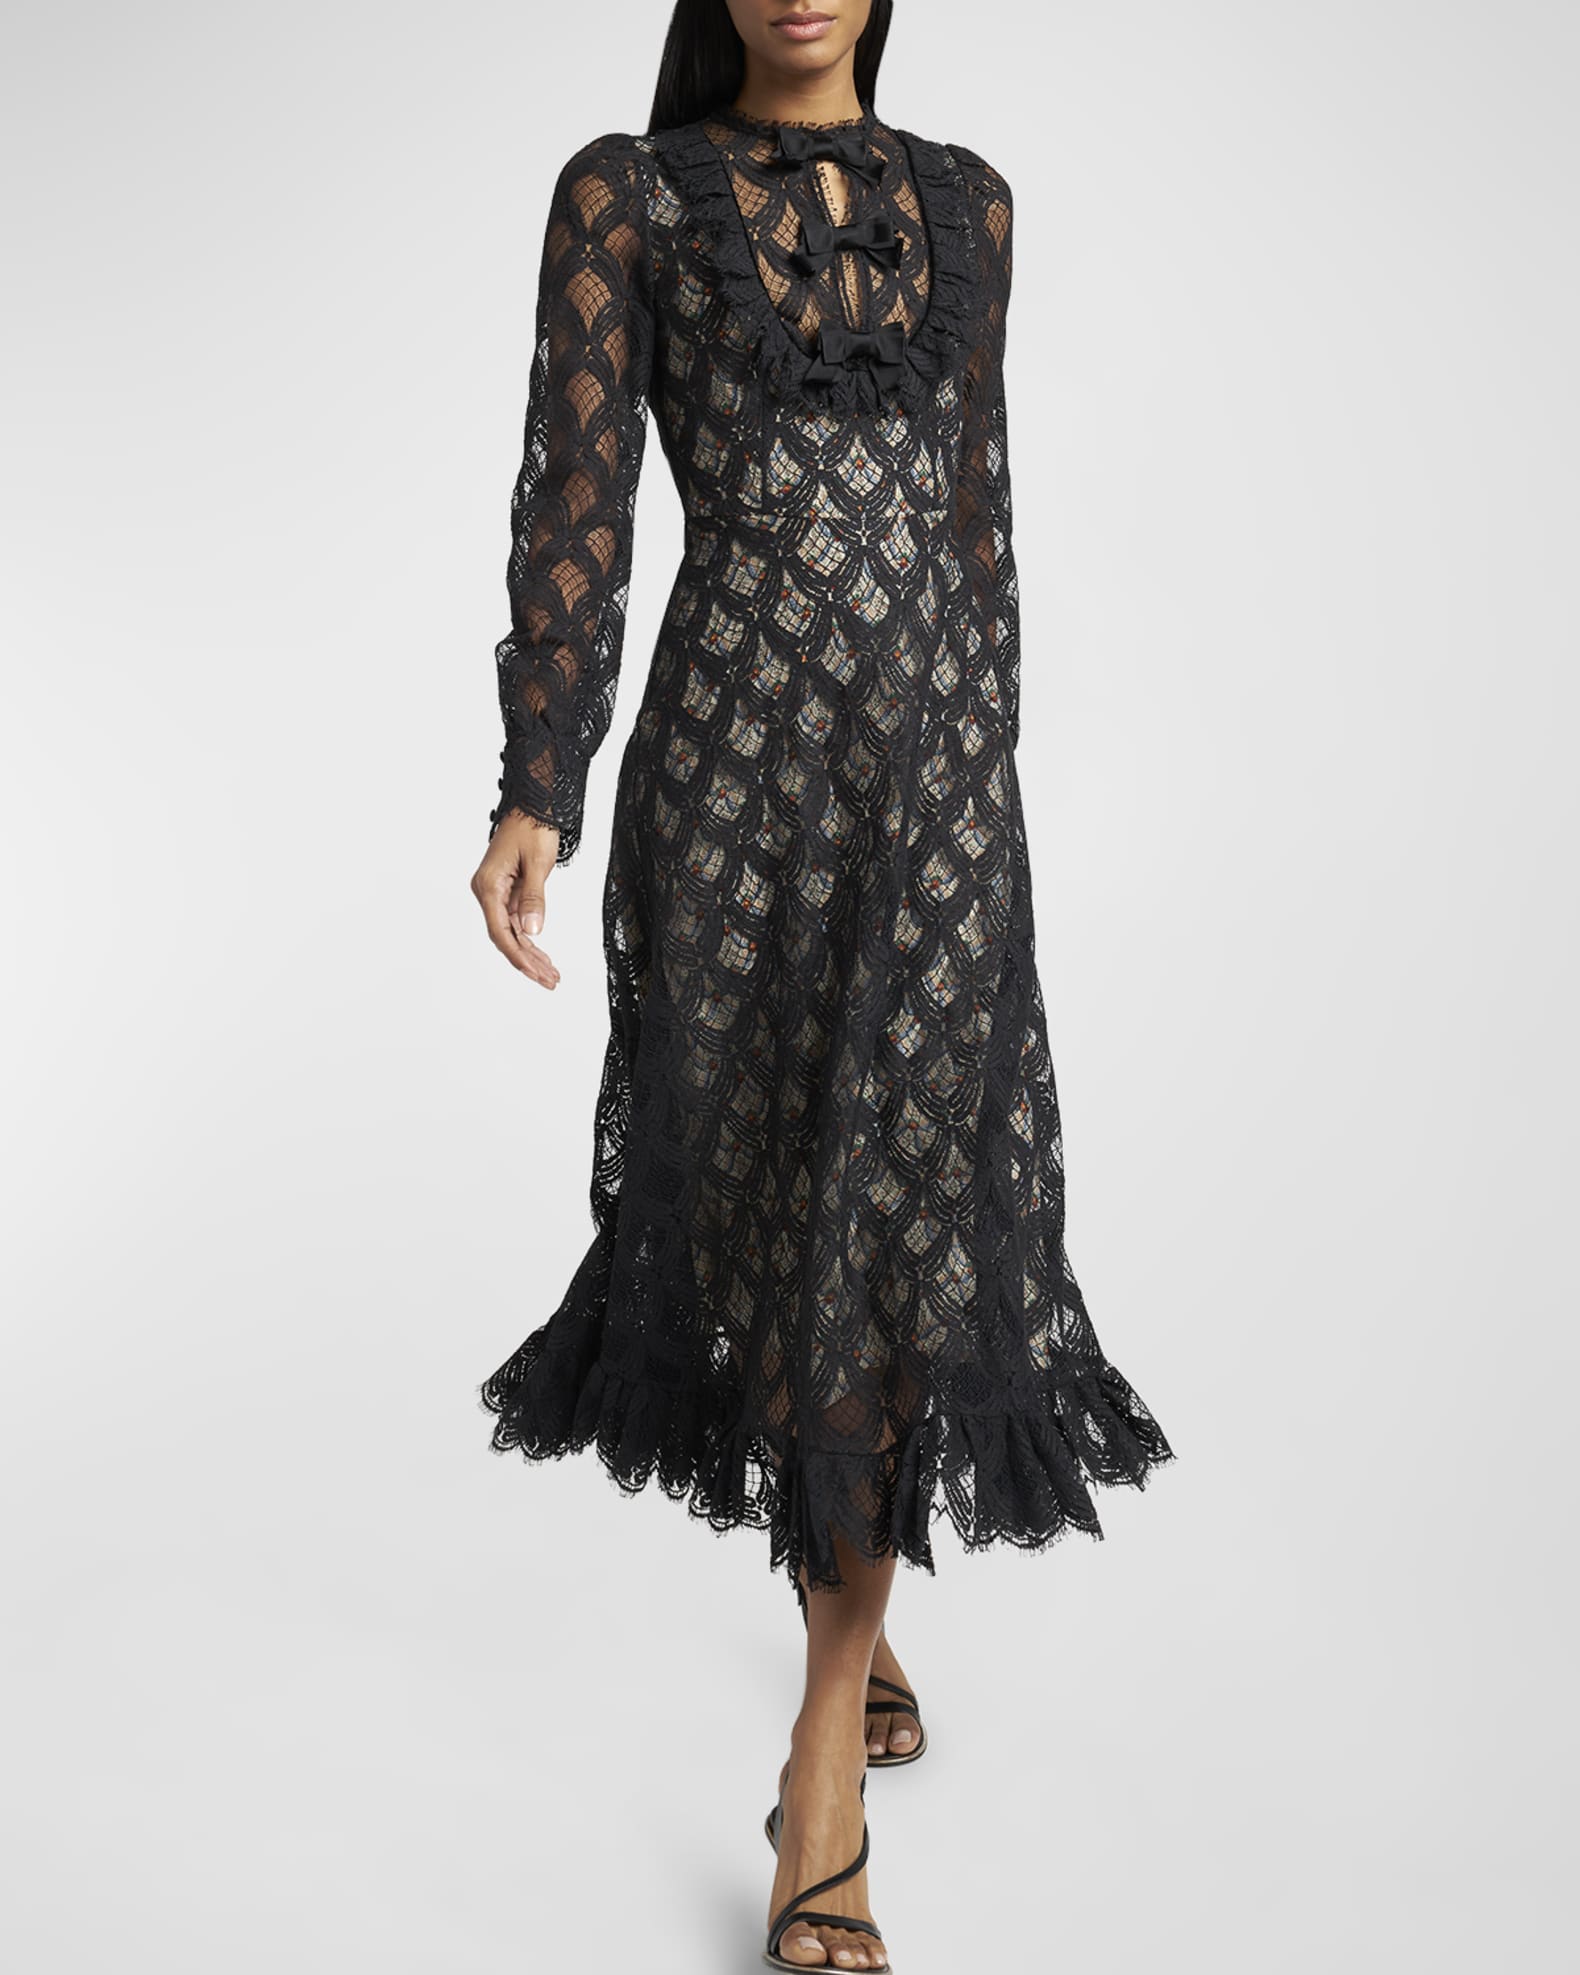 Etro Lace Midi Dress with Tapestry Patterned Underlayer | Neiman Marcus